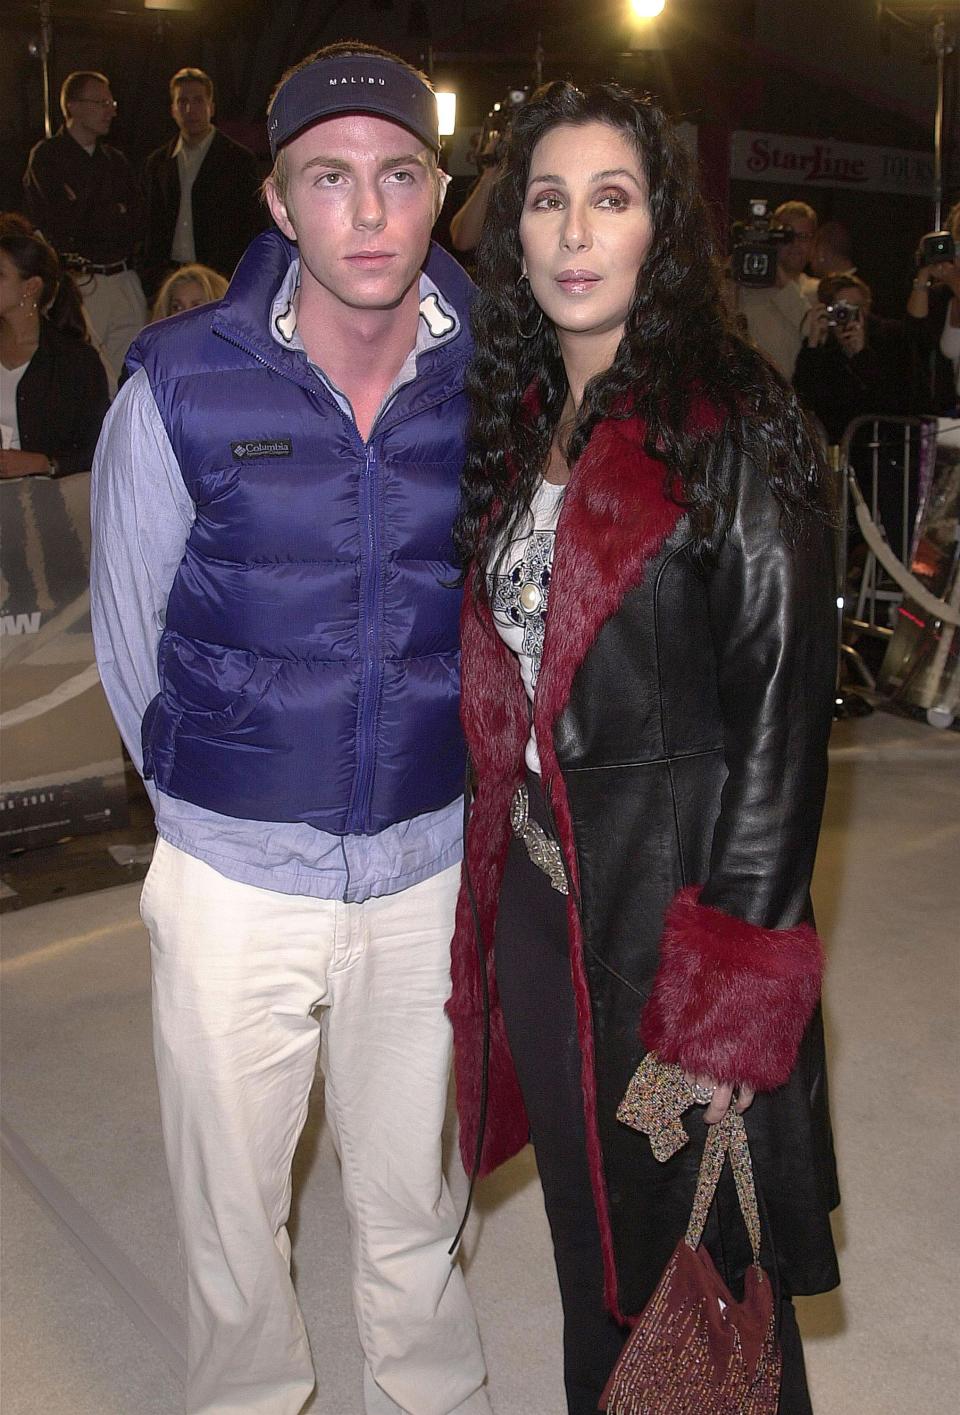 Cher and Elijah Blue at the premiere of the film "Blow" on March 29, 2001 at the Mann's Chinese Theatre in Hollywood, Calif.